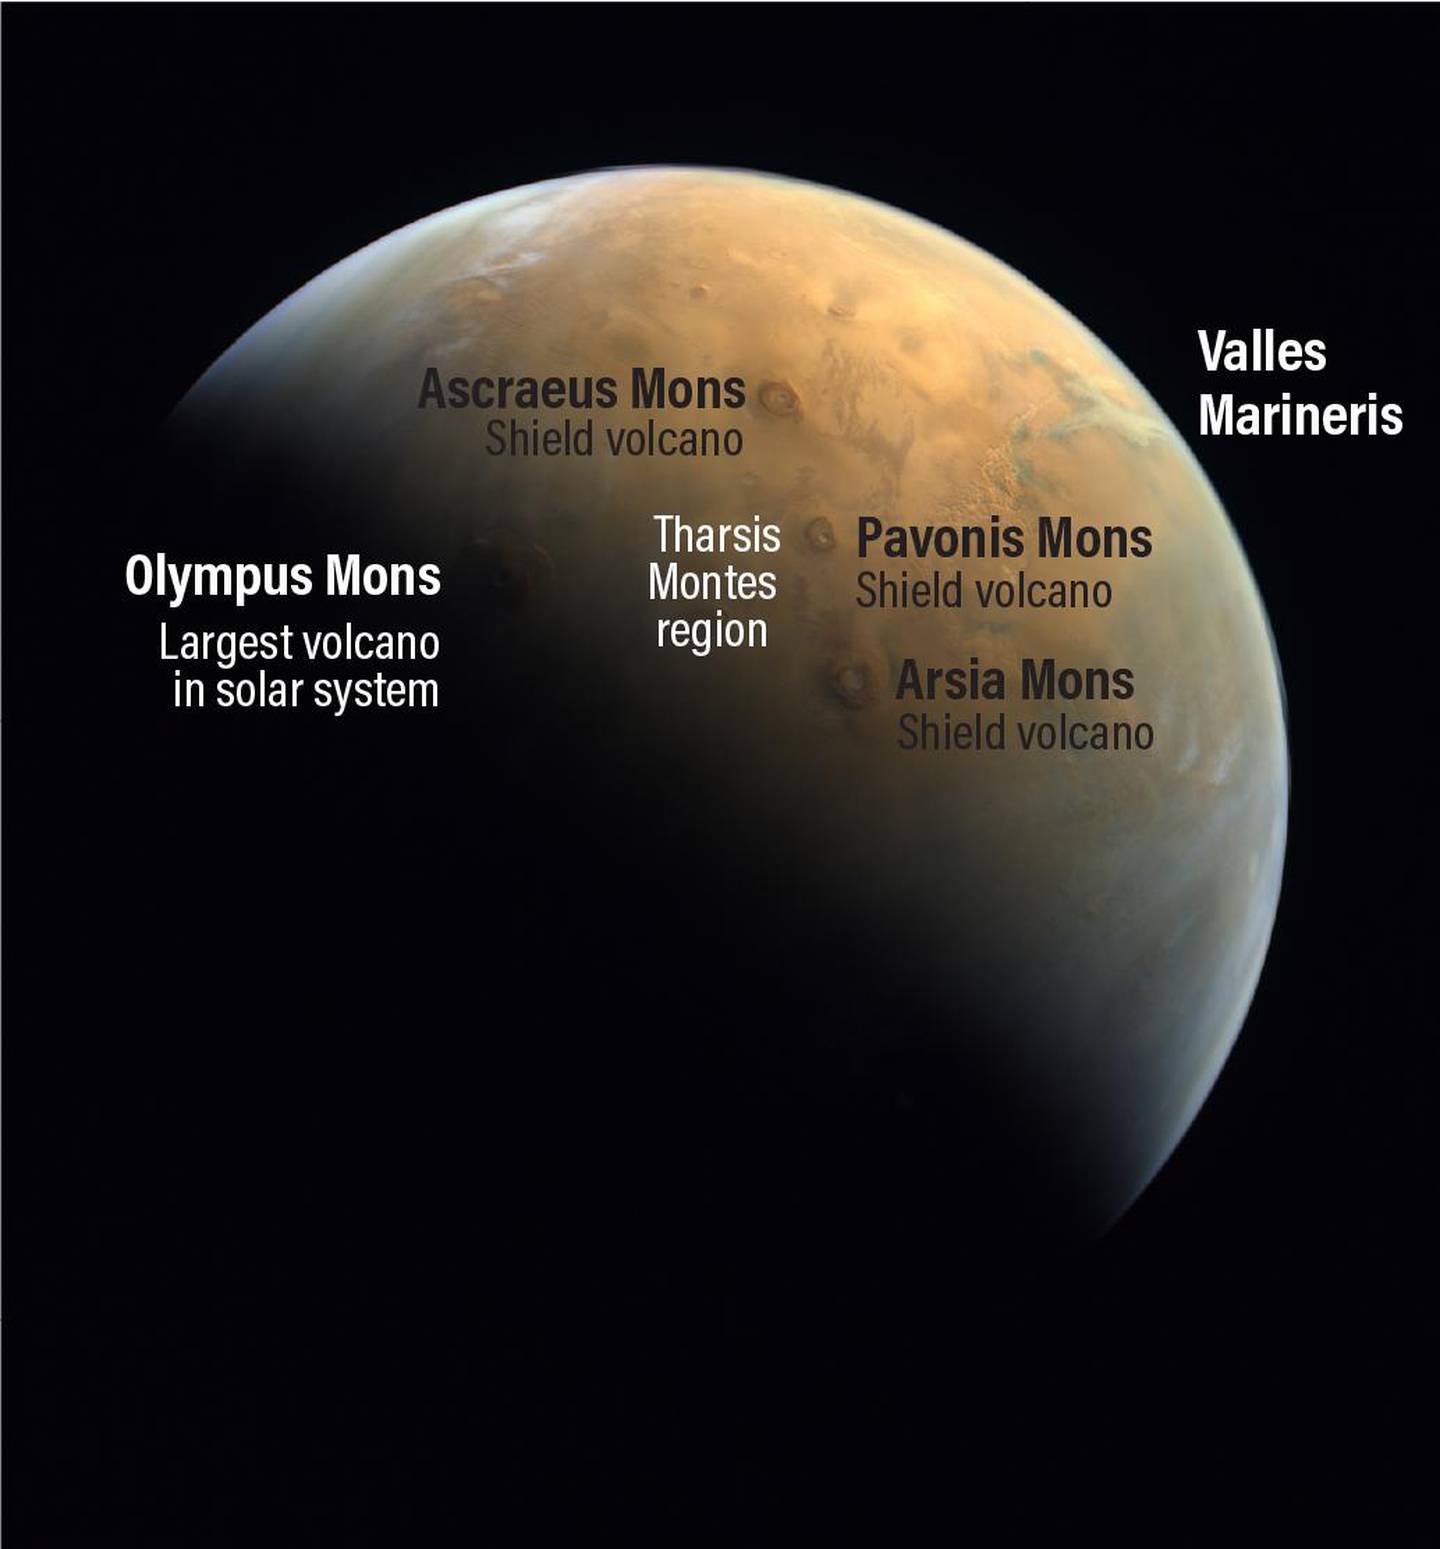 The Hope probe captured Olympus Mons, largest volcano in solar system, during sunrise.